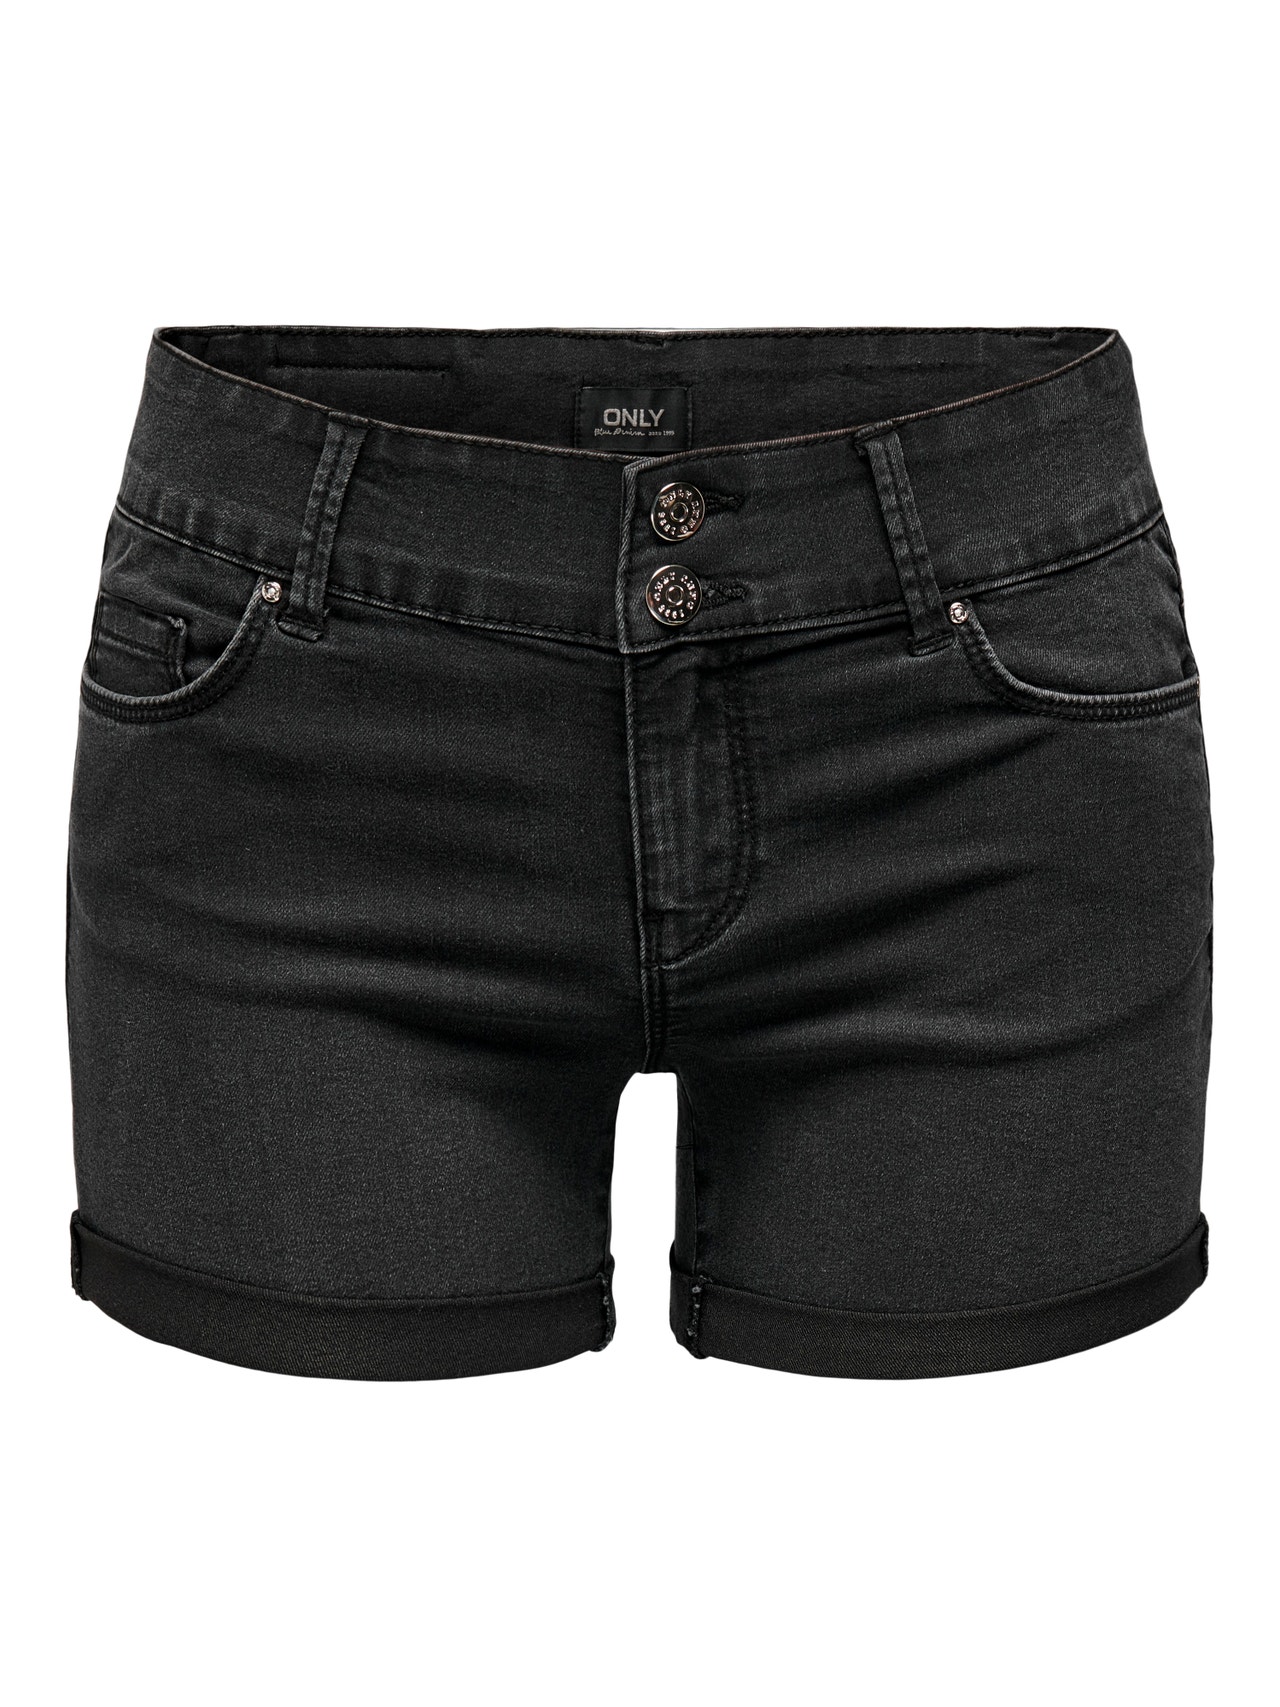 ONLY Shorts Slim Fit Taille classique Tall -Black Denim - 15295874